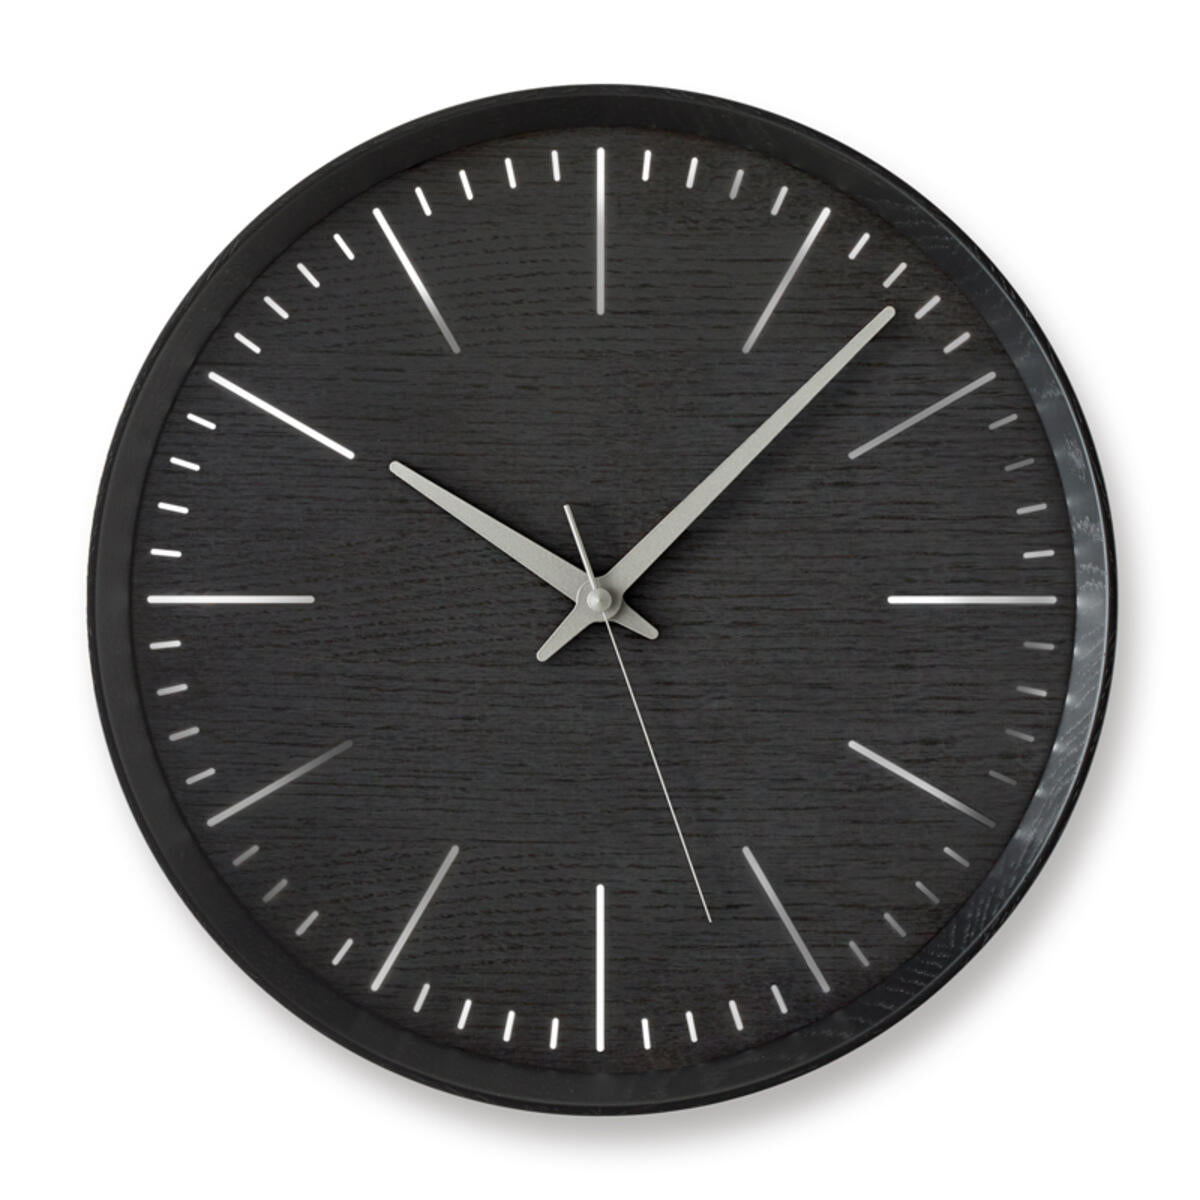 Fluctuation - BK Clock by Lemnos